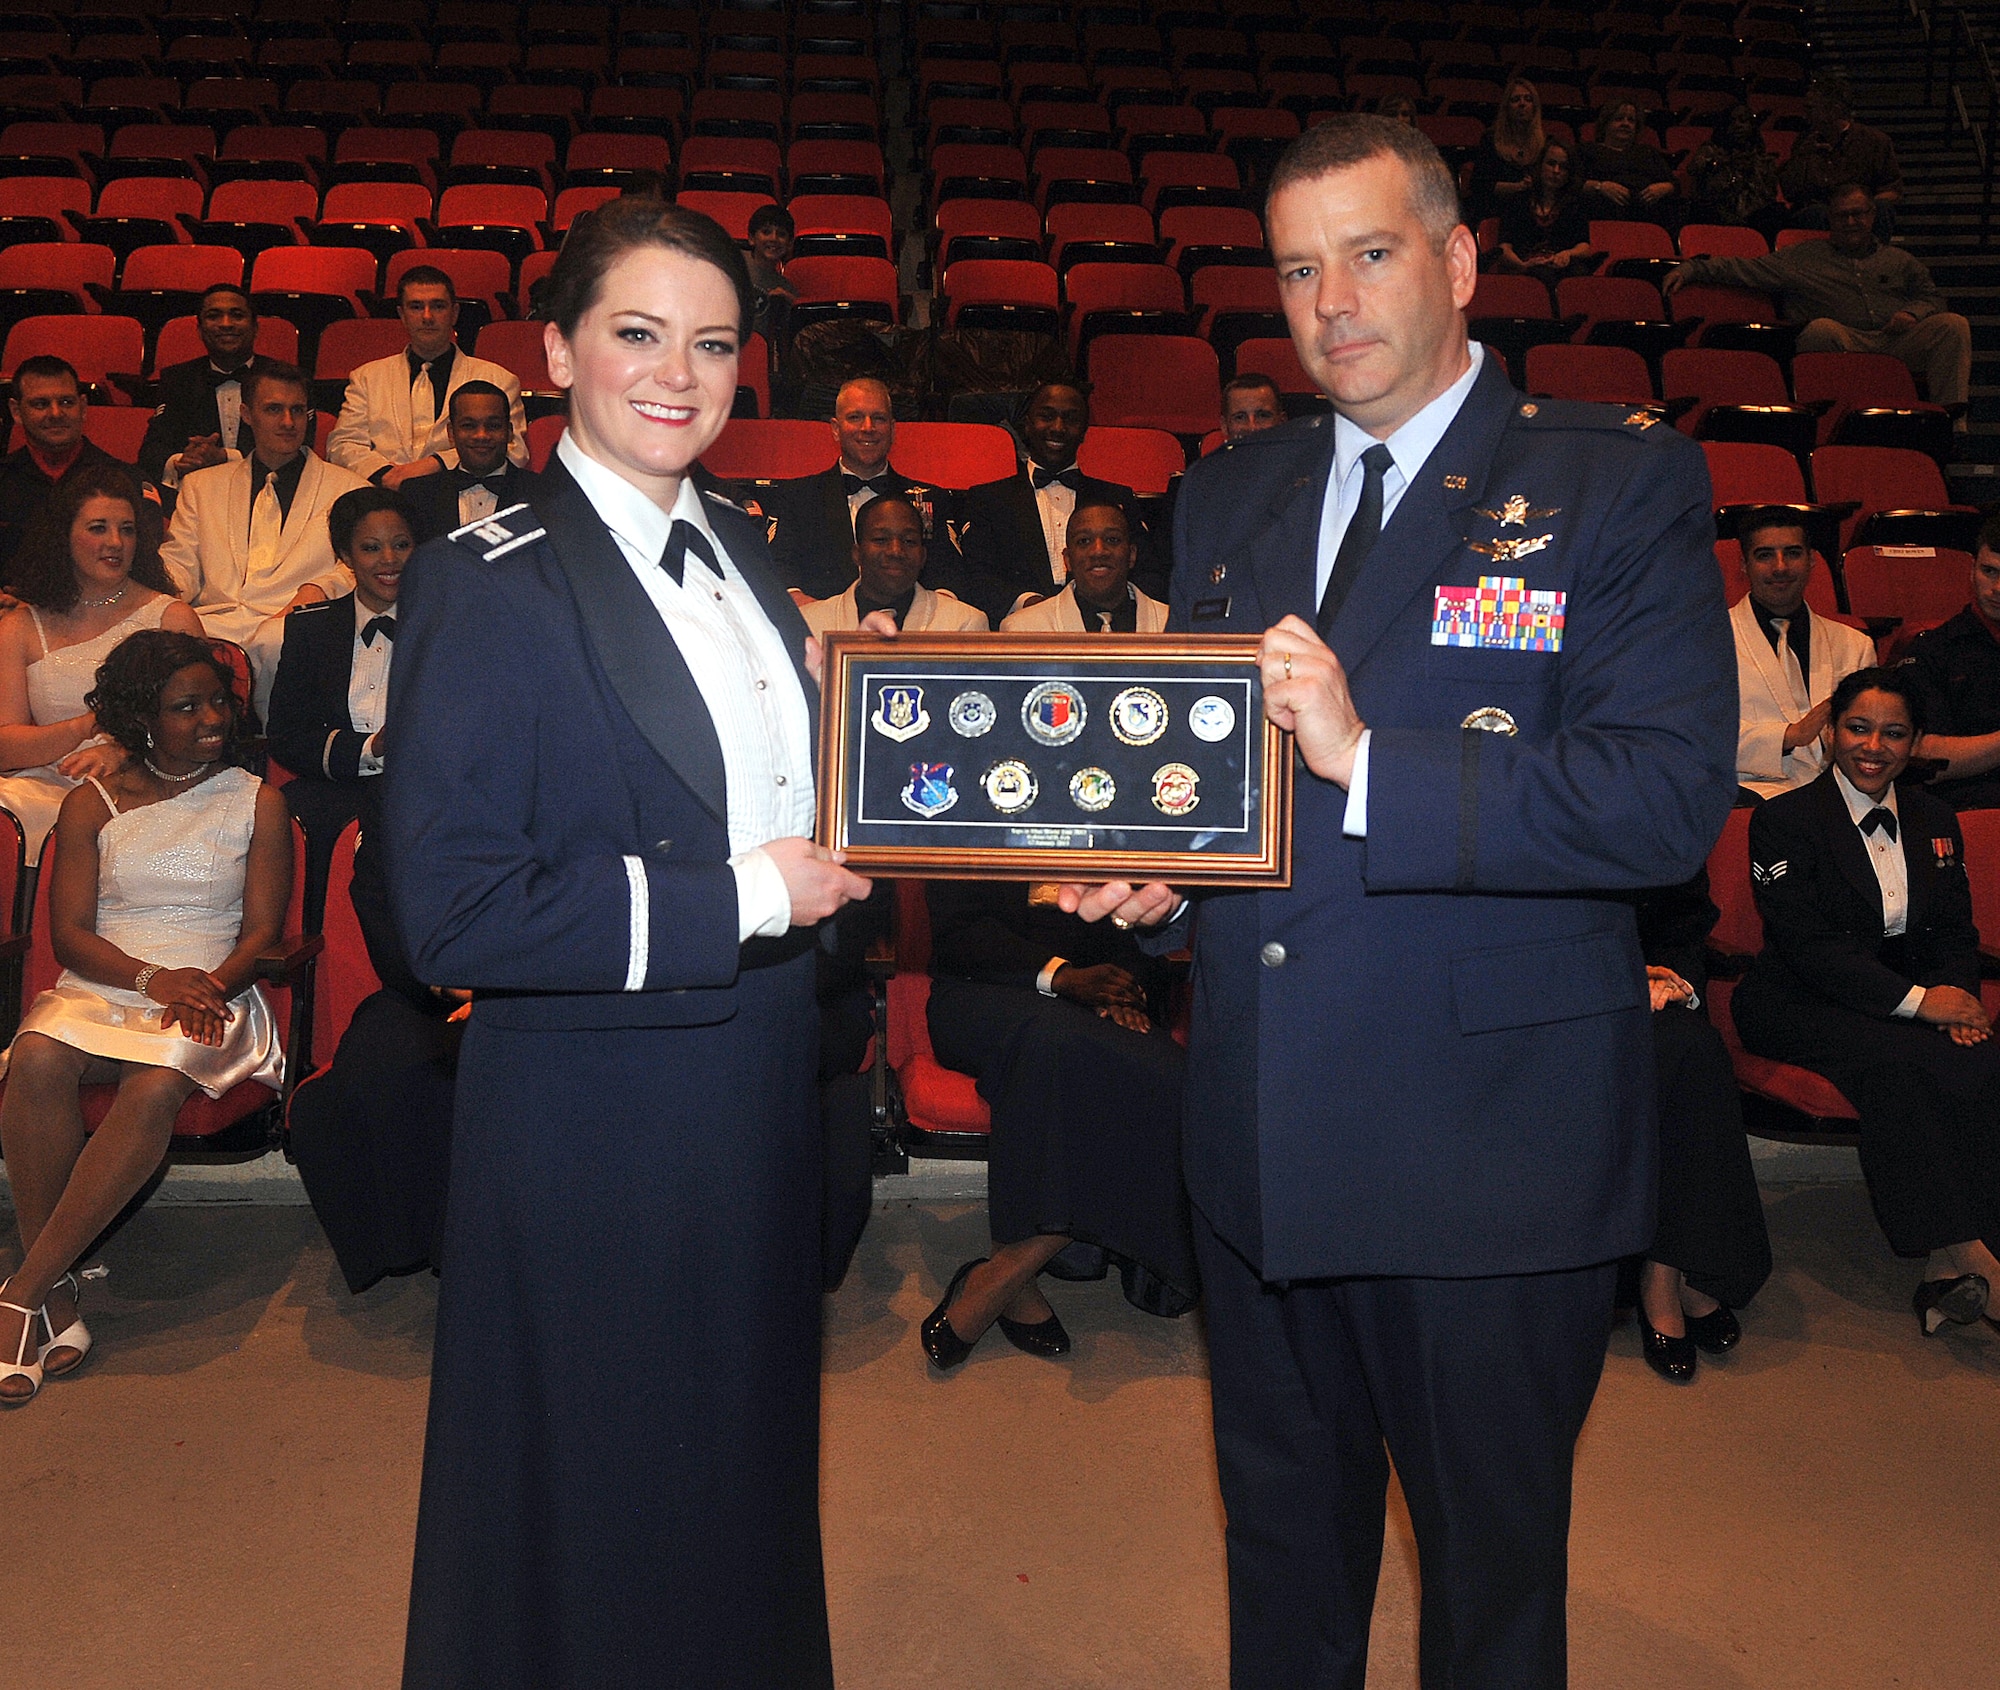 Col. Mitch Butikofer, 78th Air Base Wing commander, presents a coin case to Tops in Blue following the performance at a packed Warner Robins Civic Center Jan. 12.